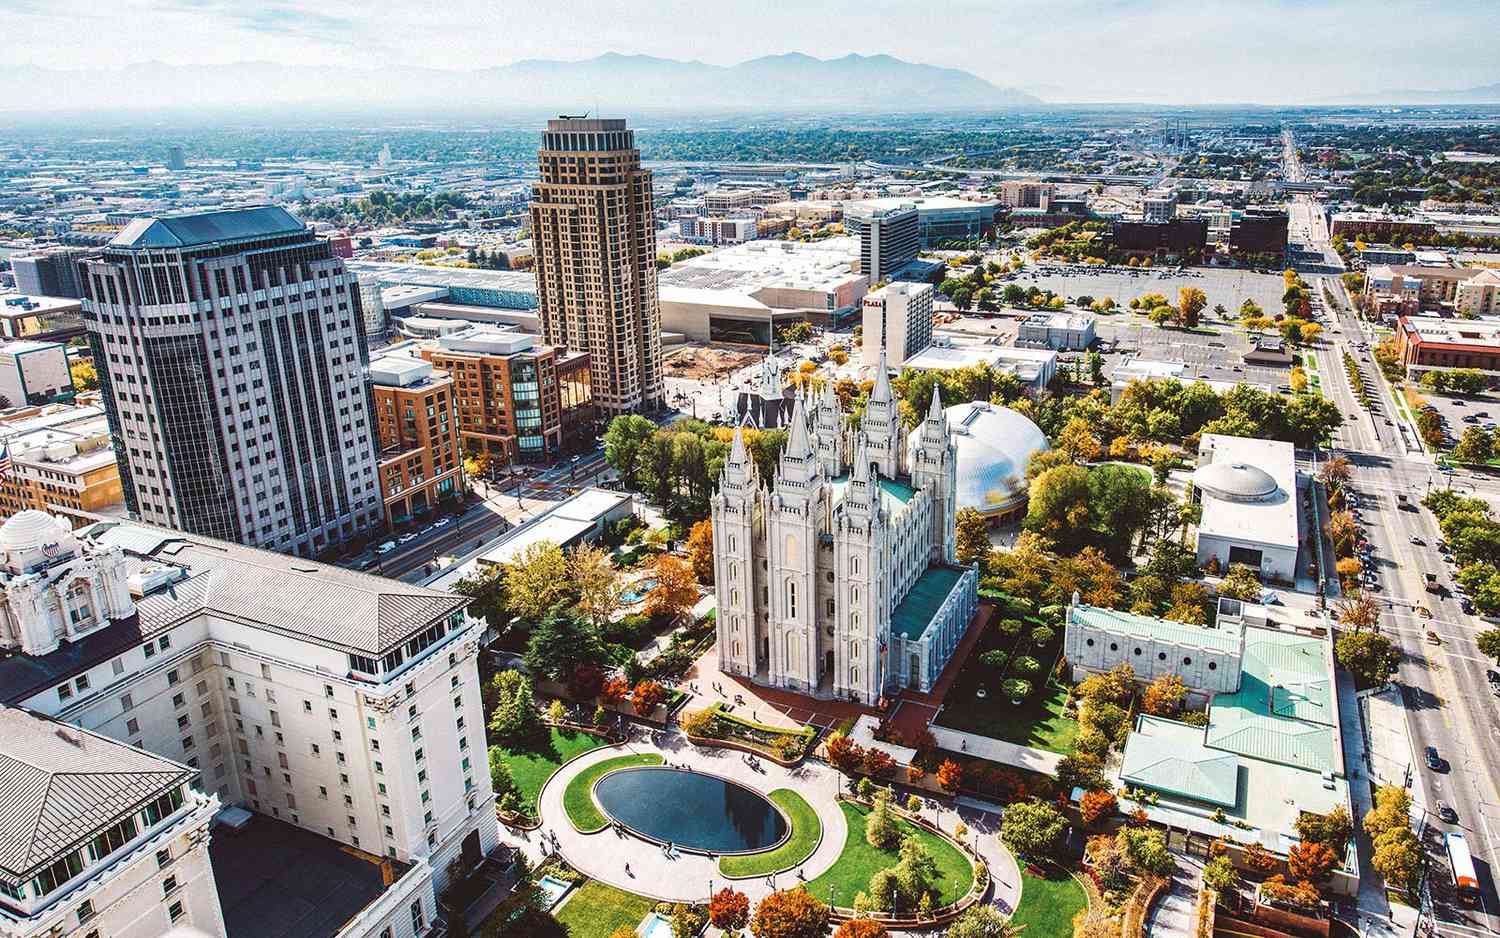 11-facts-about-innovations-and-technological-advances-in-salt-lake-city-utah